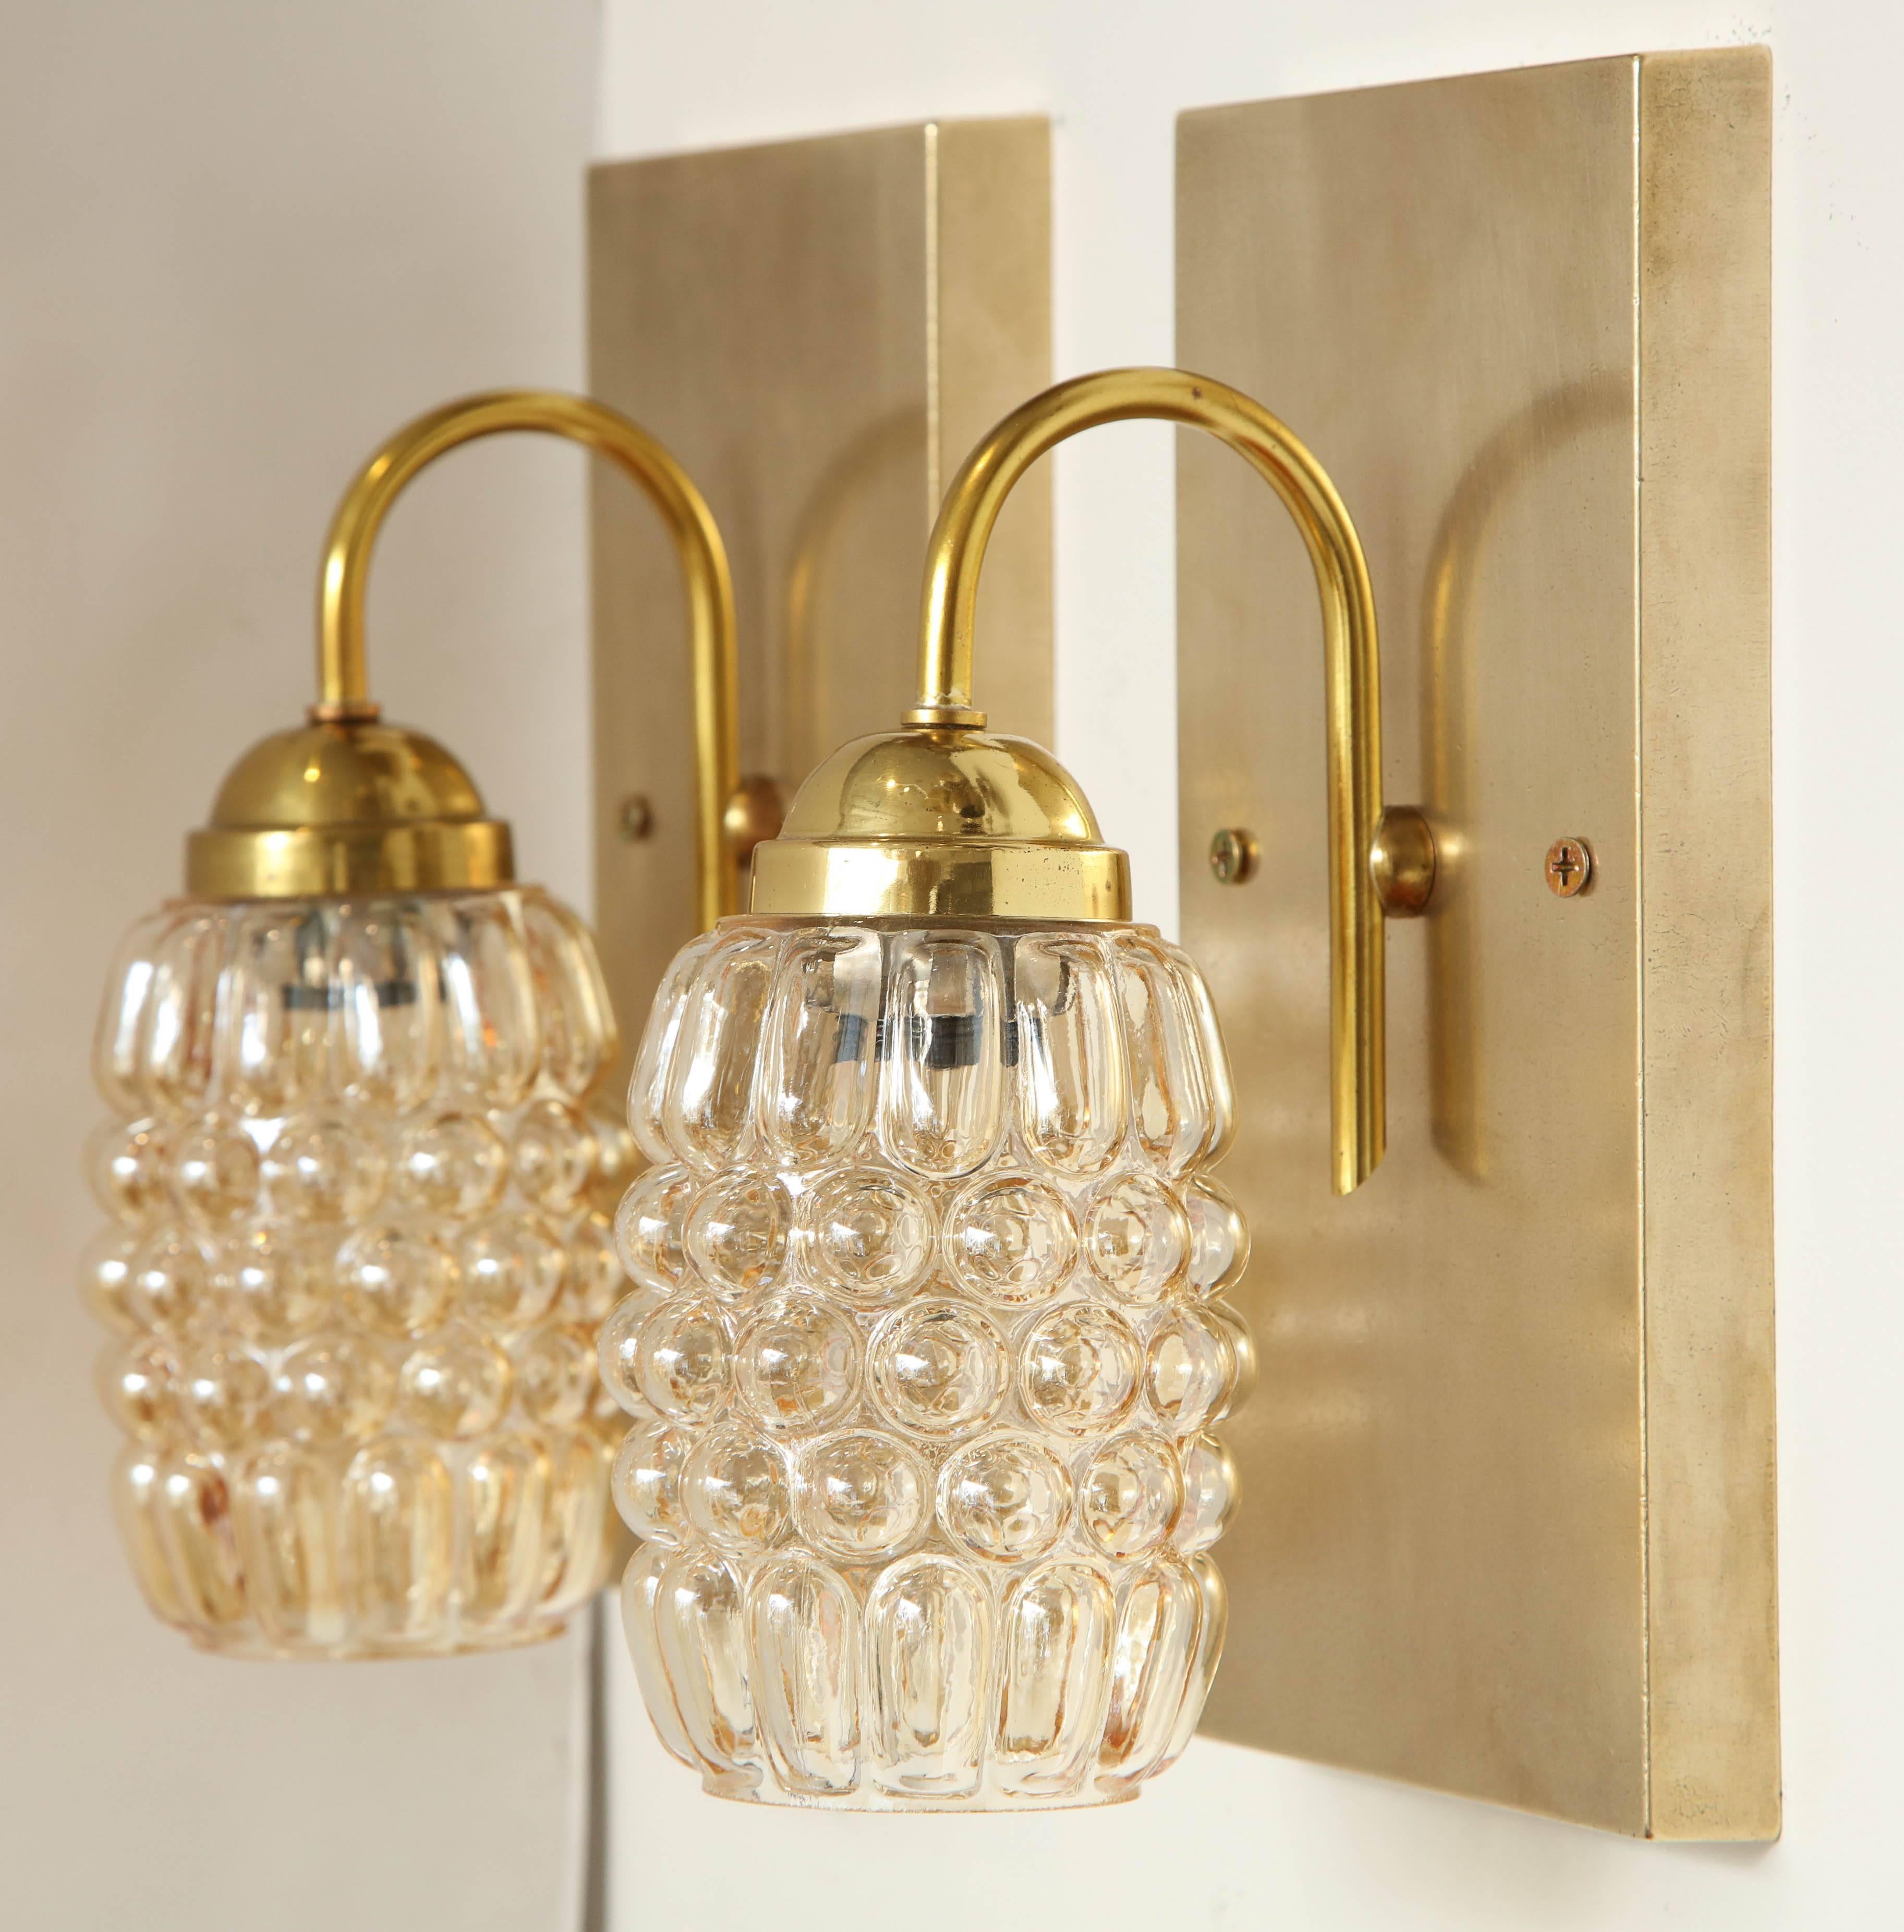 Pair of Champagne bubble glass sconces by Limburg.
The sconces have been newly rewired for the US and each take a candelabra 
light bulb.